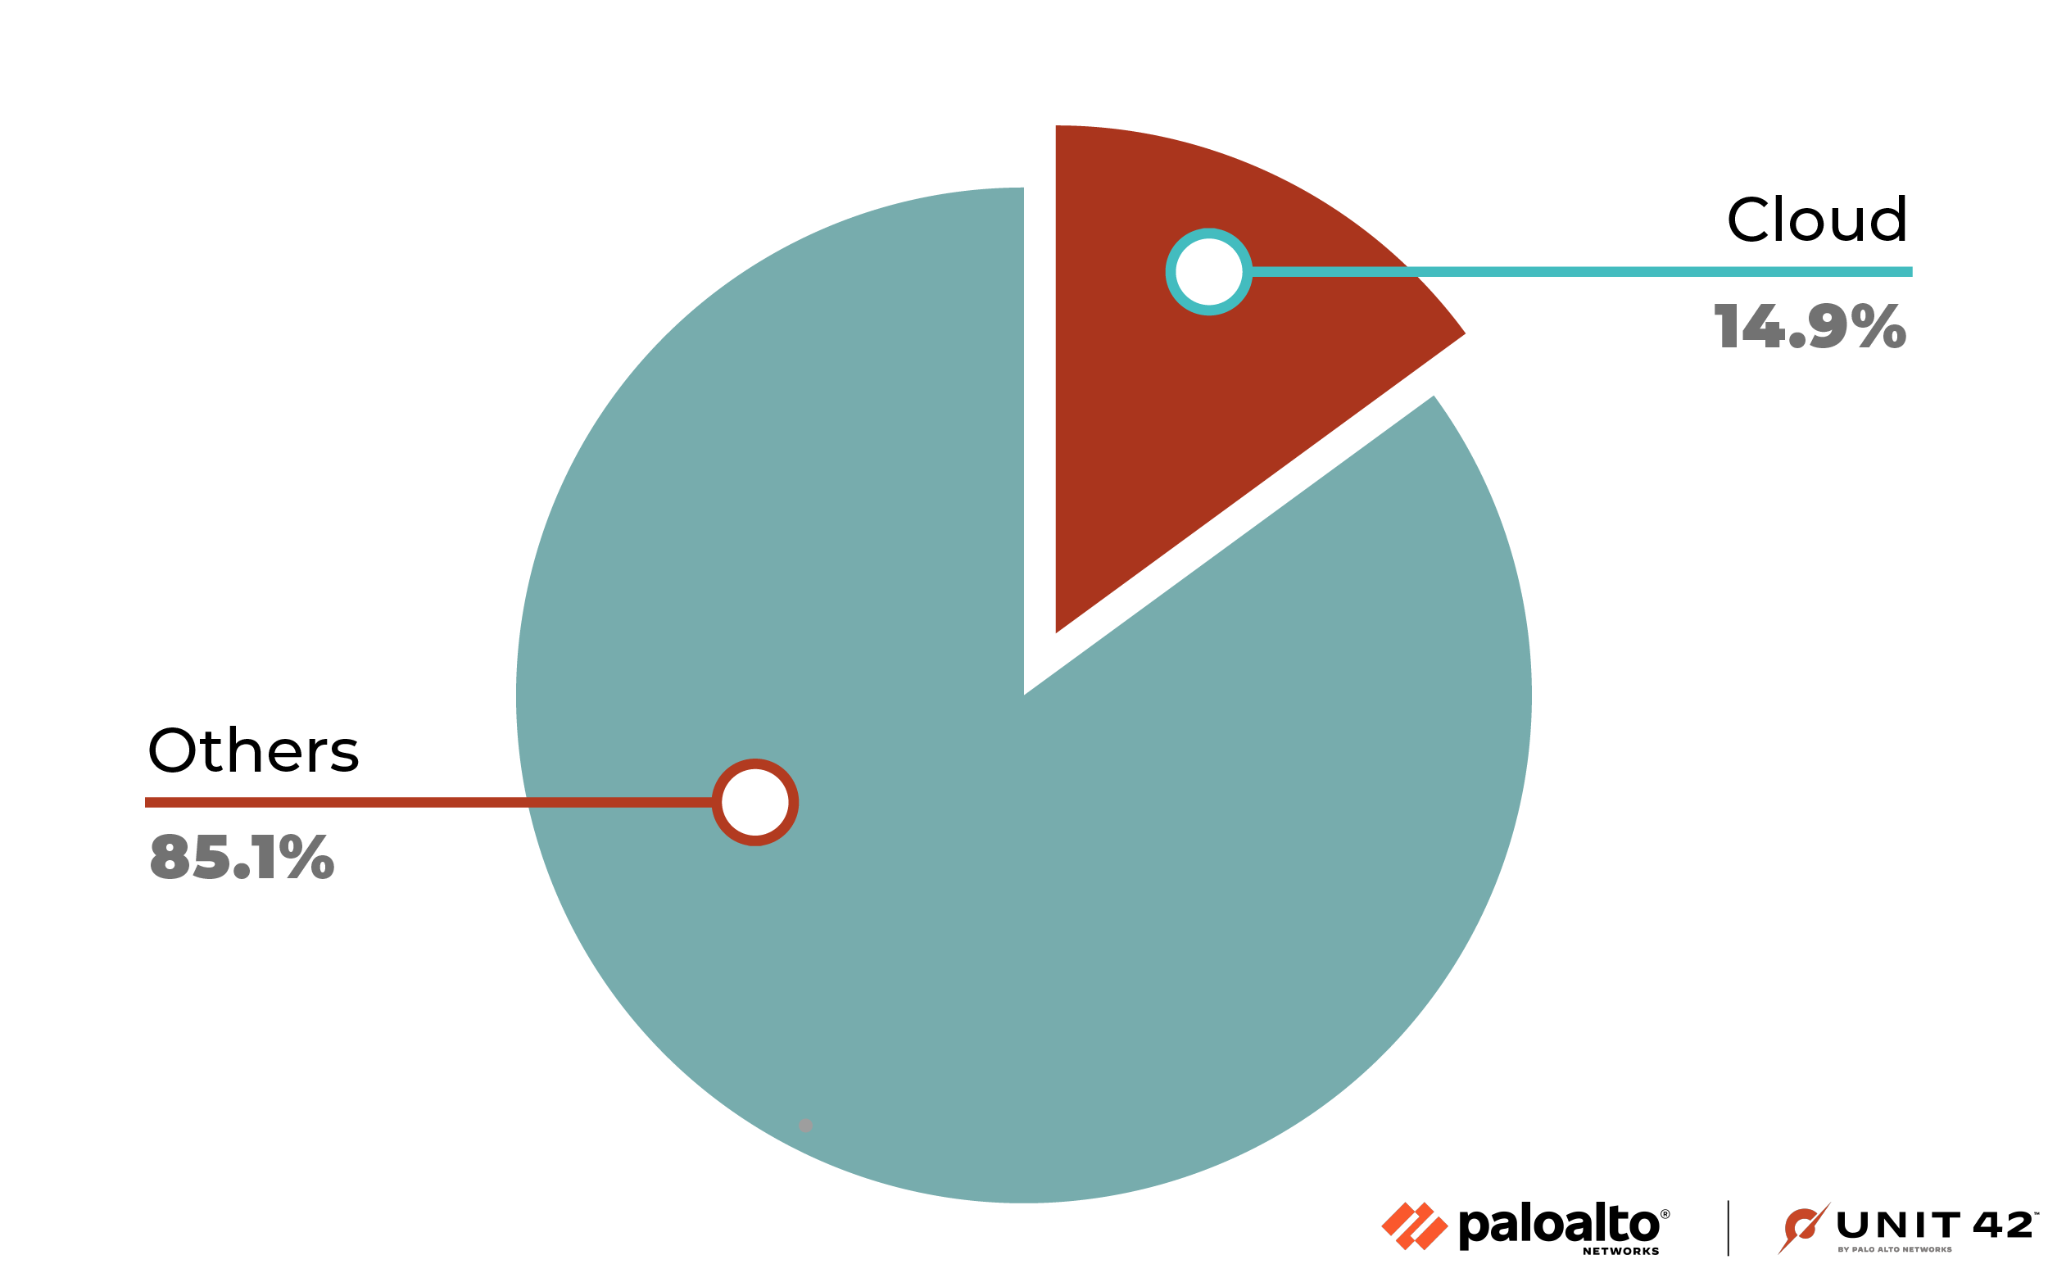 Image 3 is a pie chart of the destination of attacks. 85.1% are from others, and 14.9% are from the cloud. 